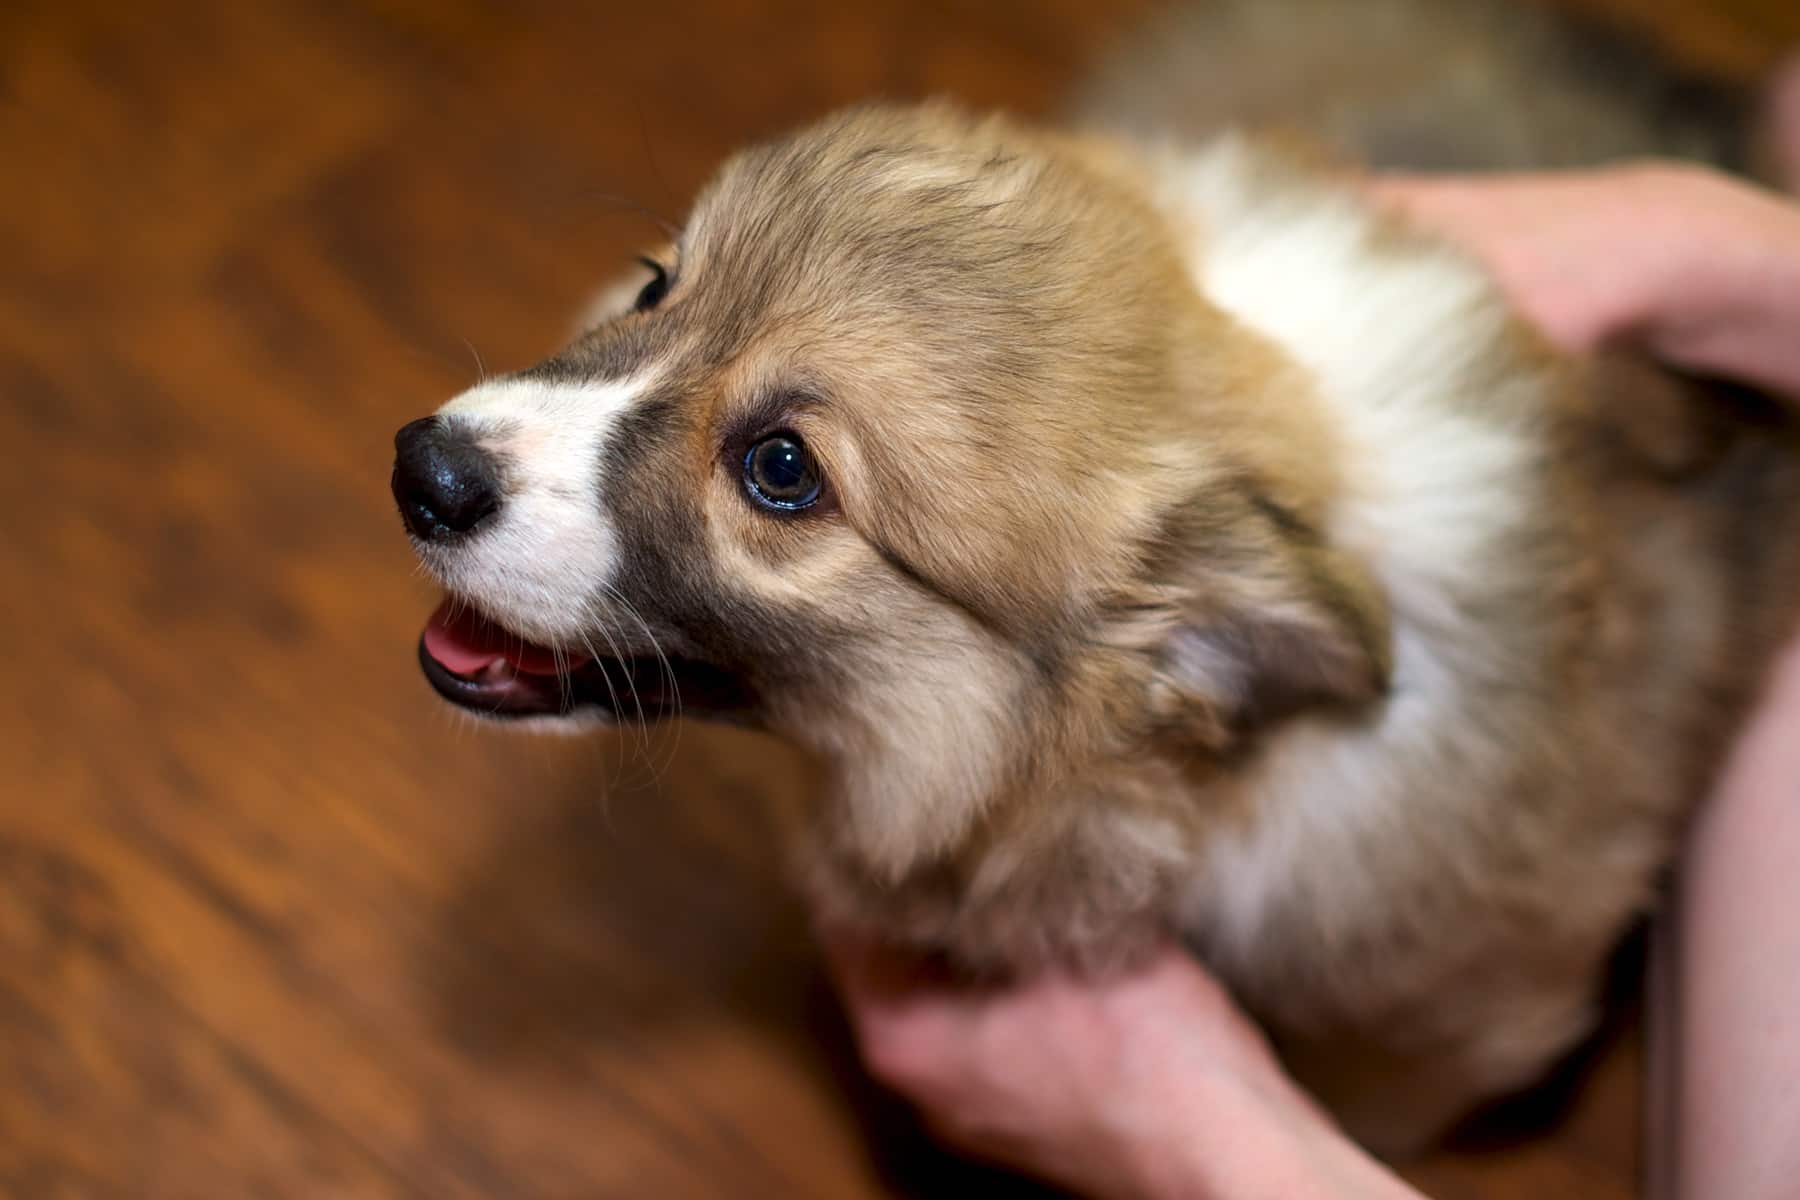 Are Corgis Good House Dogs? This Pembroke Welsh Corgi is happy to be inside being held by his owner.